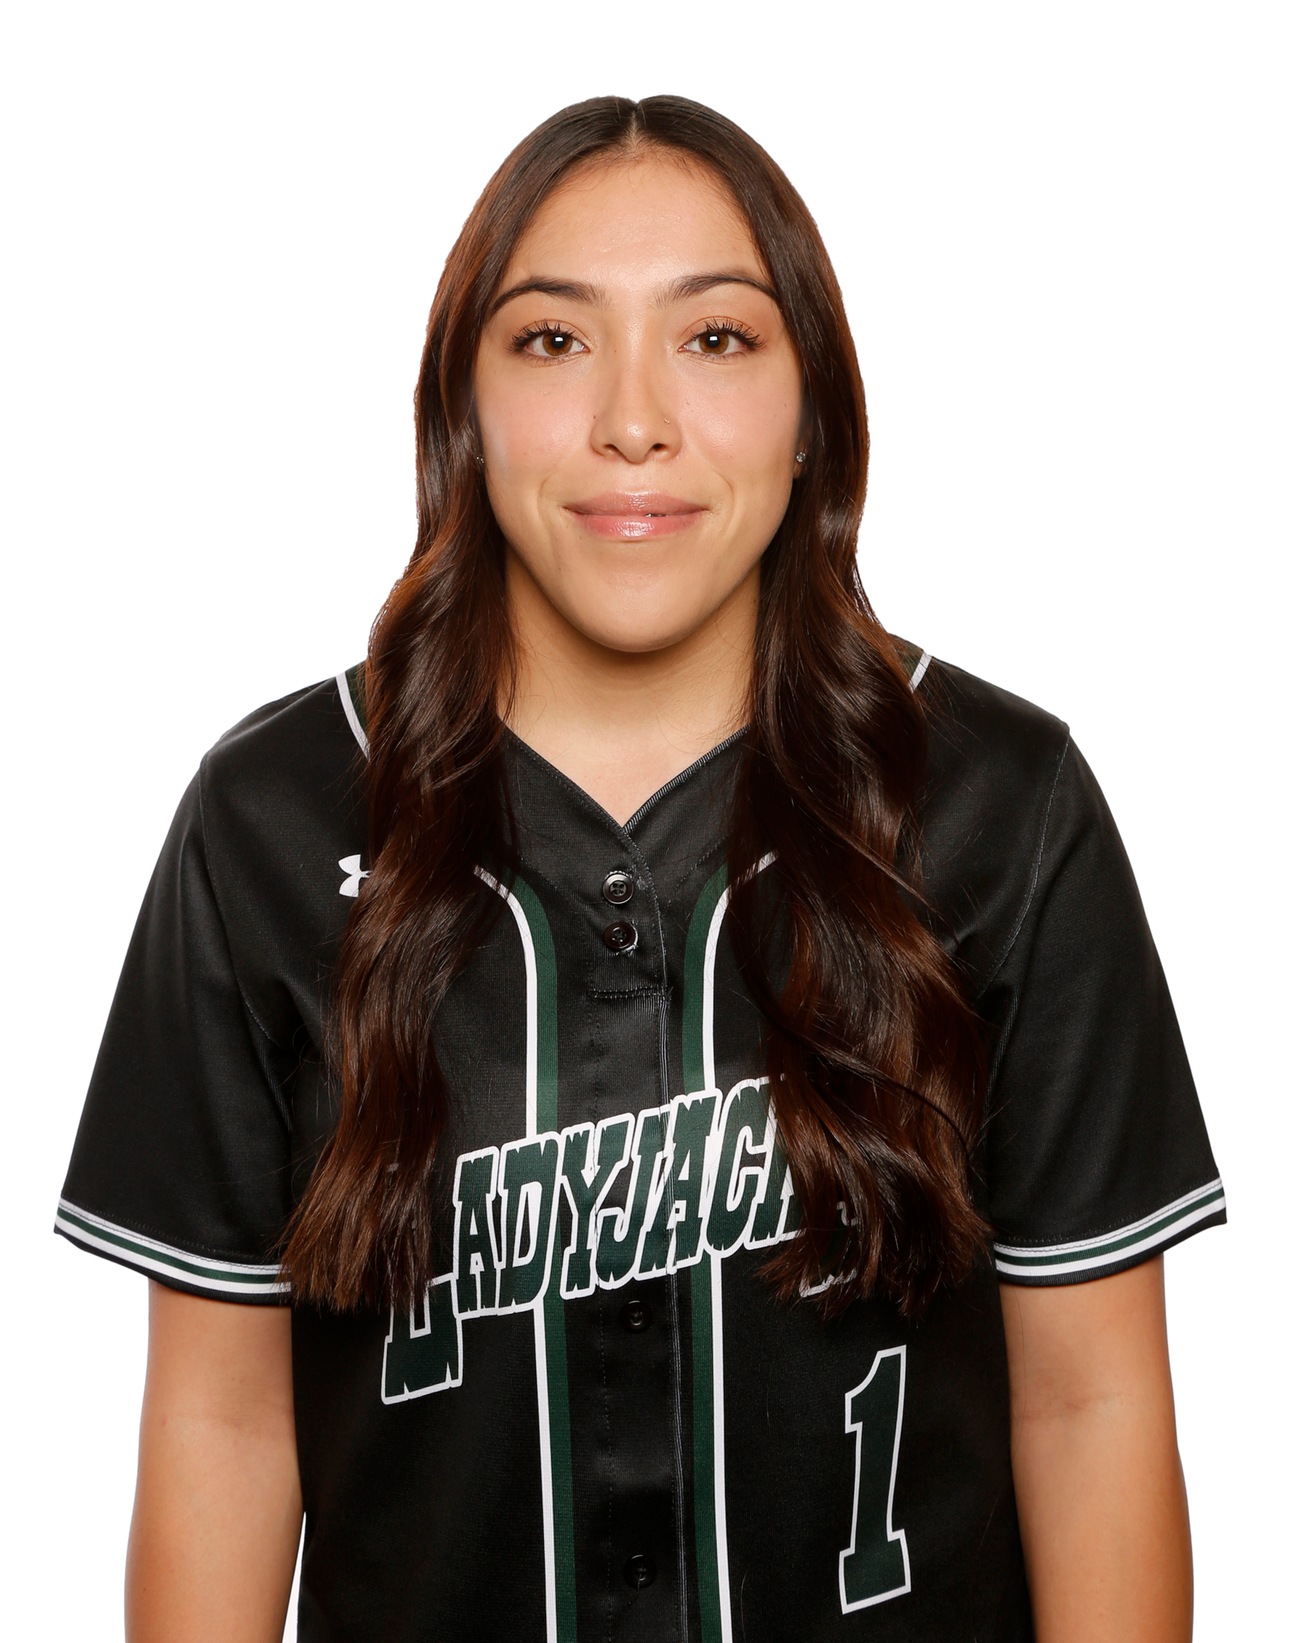 Vannity Robles picked up her first college homerun and pitching victory this past weekend in Minot.